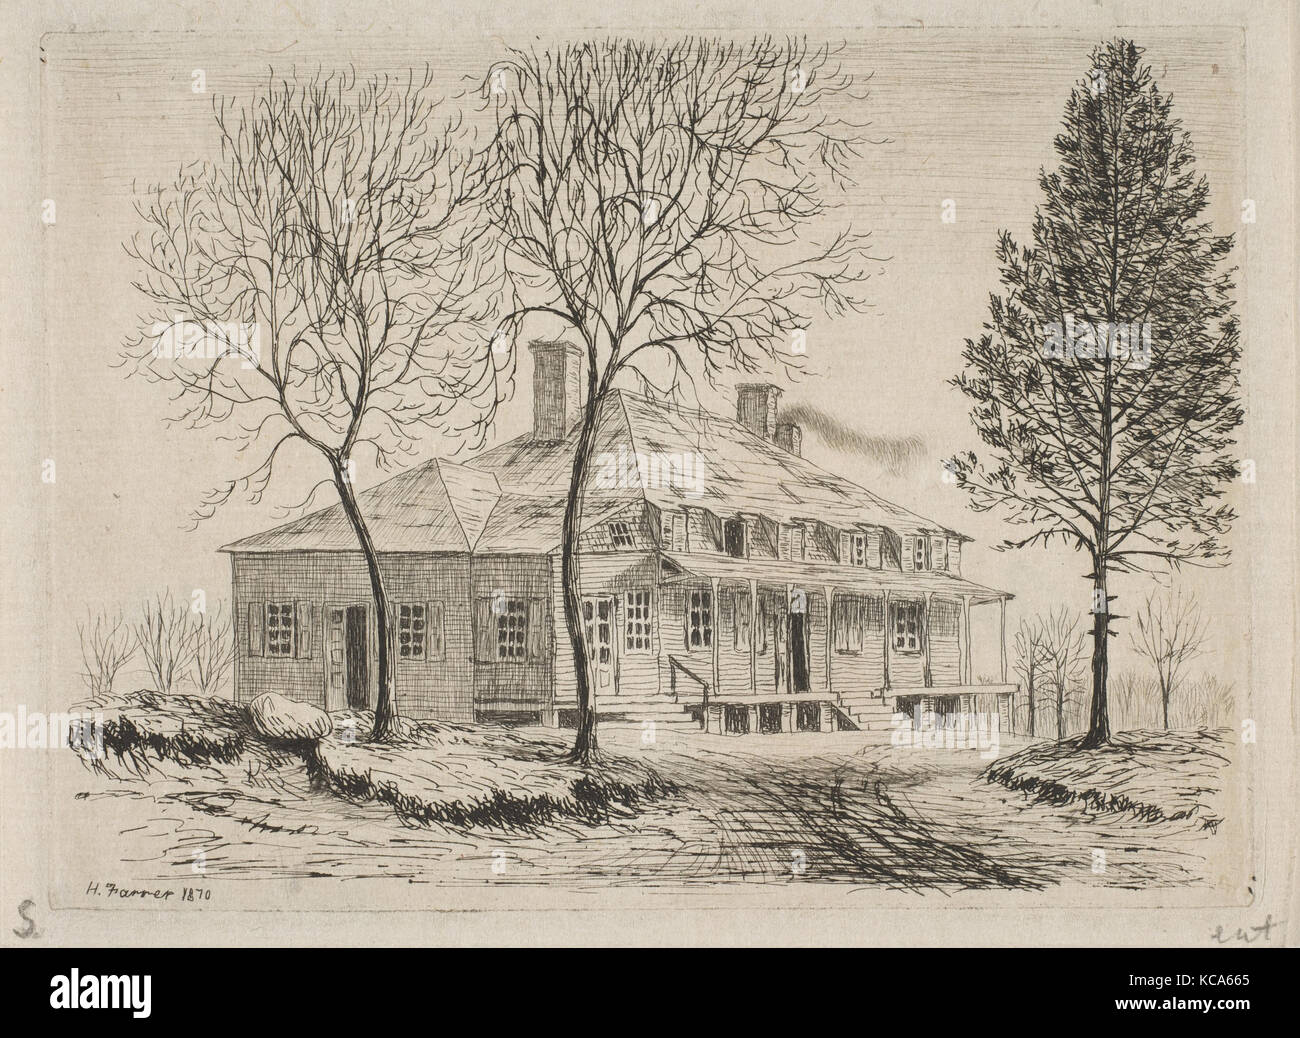 Somerindyck House (from Scenes of Old New York), Henry Farrer, 1870 Stock Photo